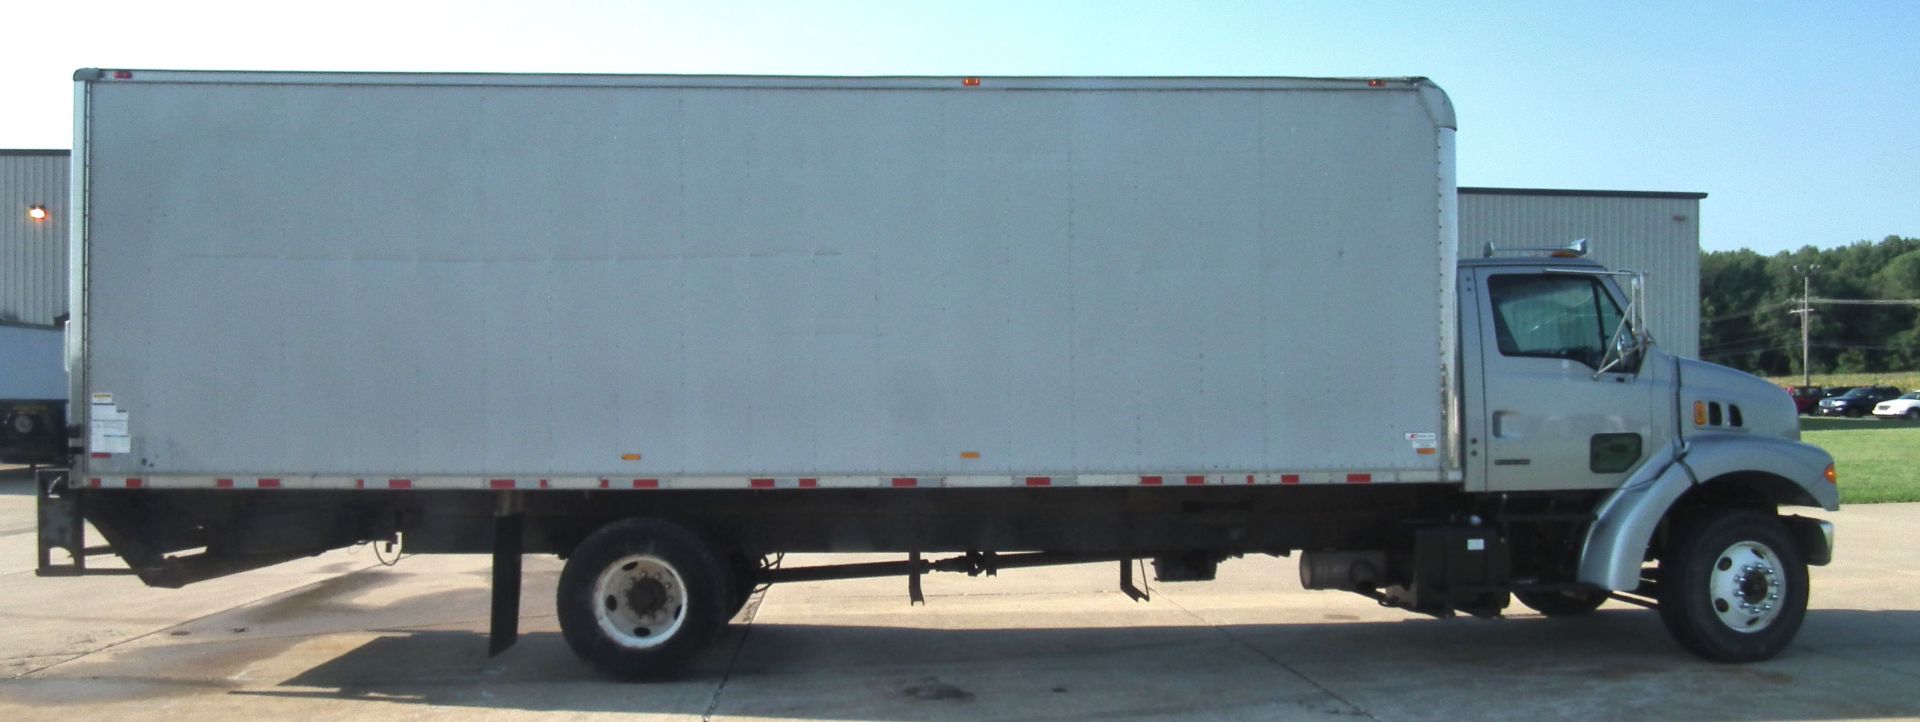 Sterling L7501 Box Truck with Lift Gate and Tilt Bed B3298 - Image 5 of 60